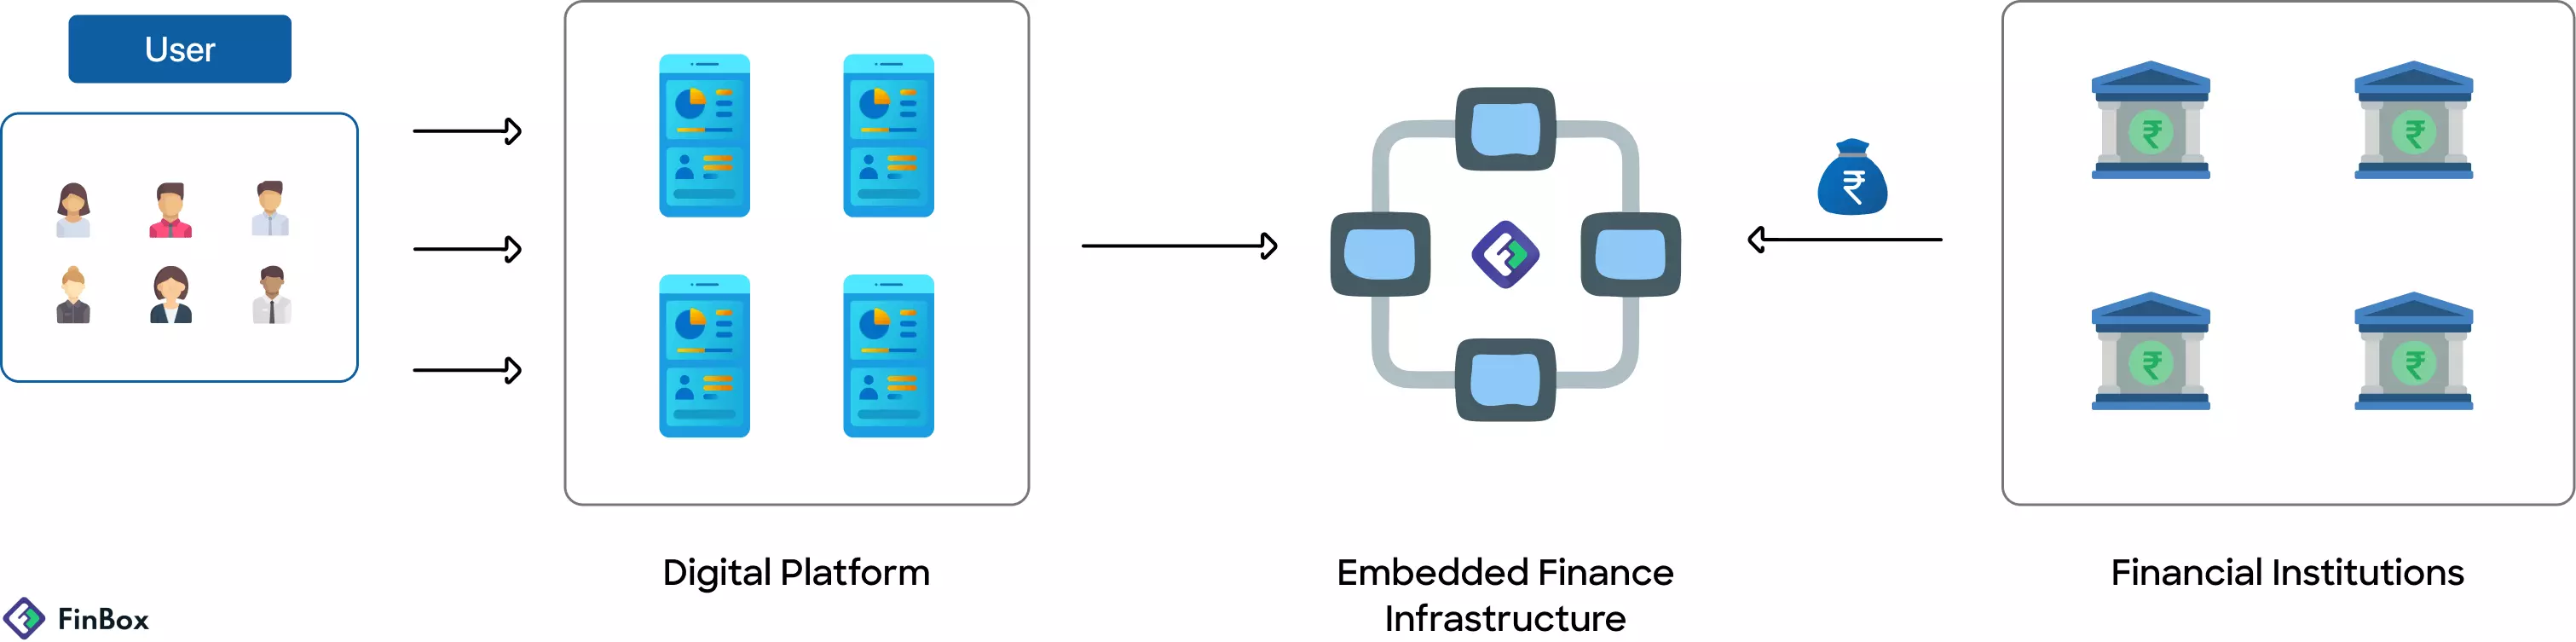 In embedded finance,  A digital platform, an embedded finance infrastructure company (fintech), and a financial institution like a bank or NBFC cooperate to deliver value.

